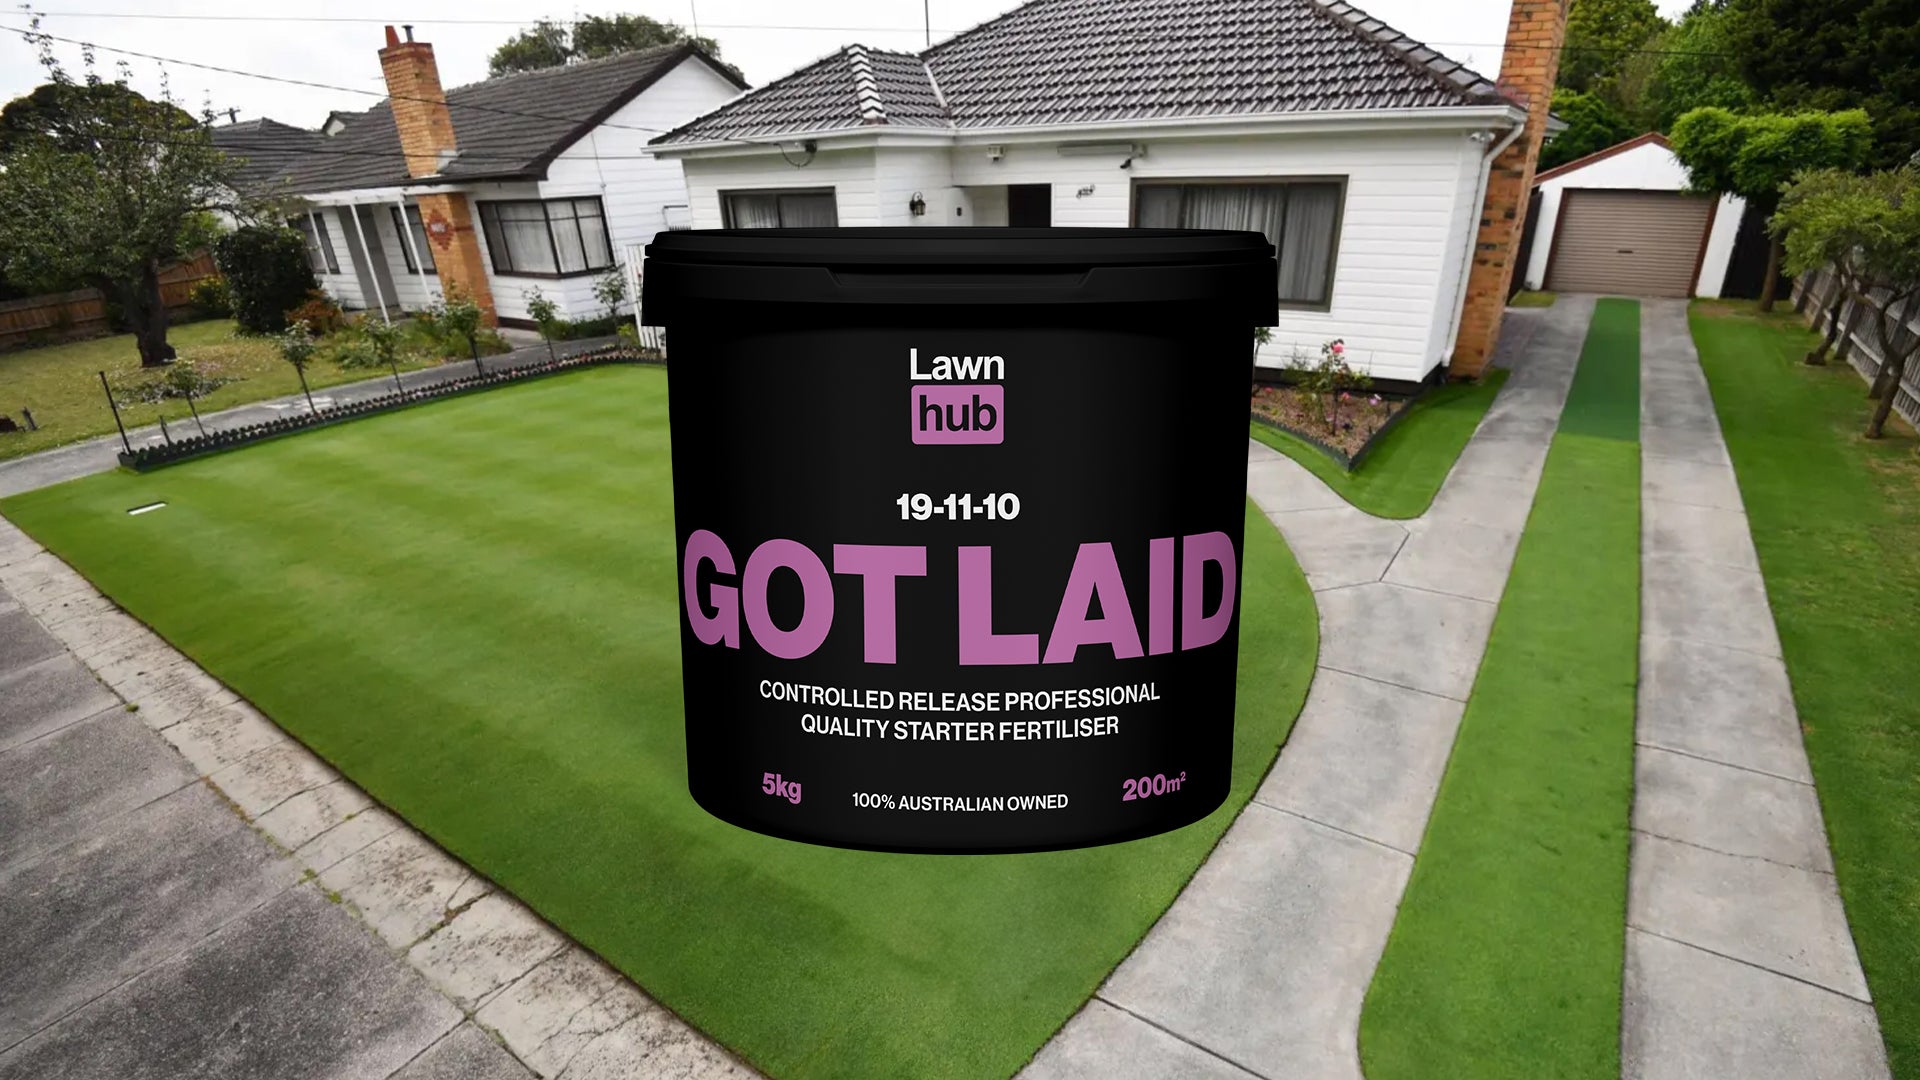 So your lawn just GOT LAID?